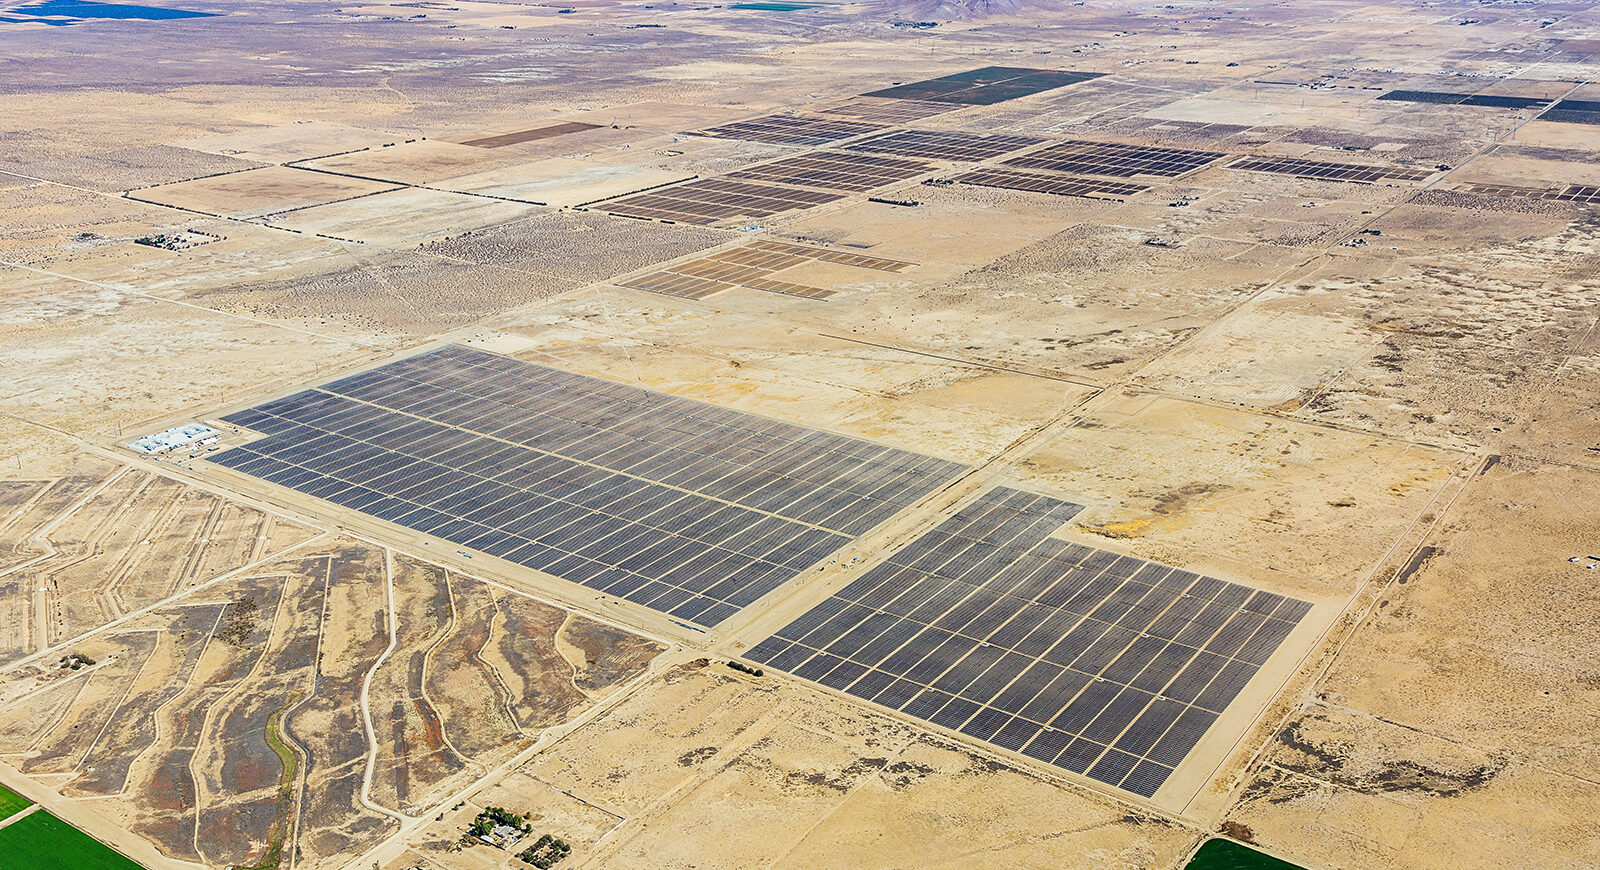 Aerial view of solar panels on the plain